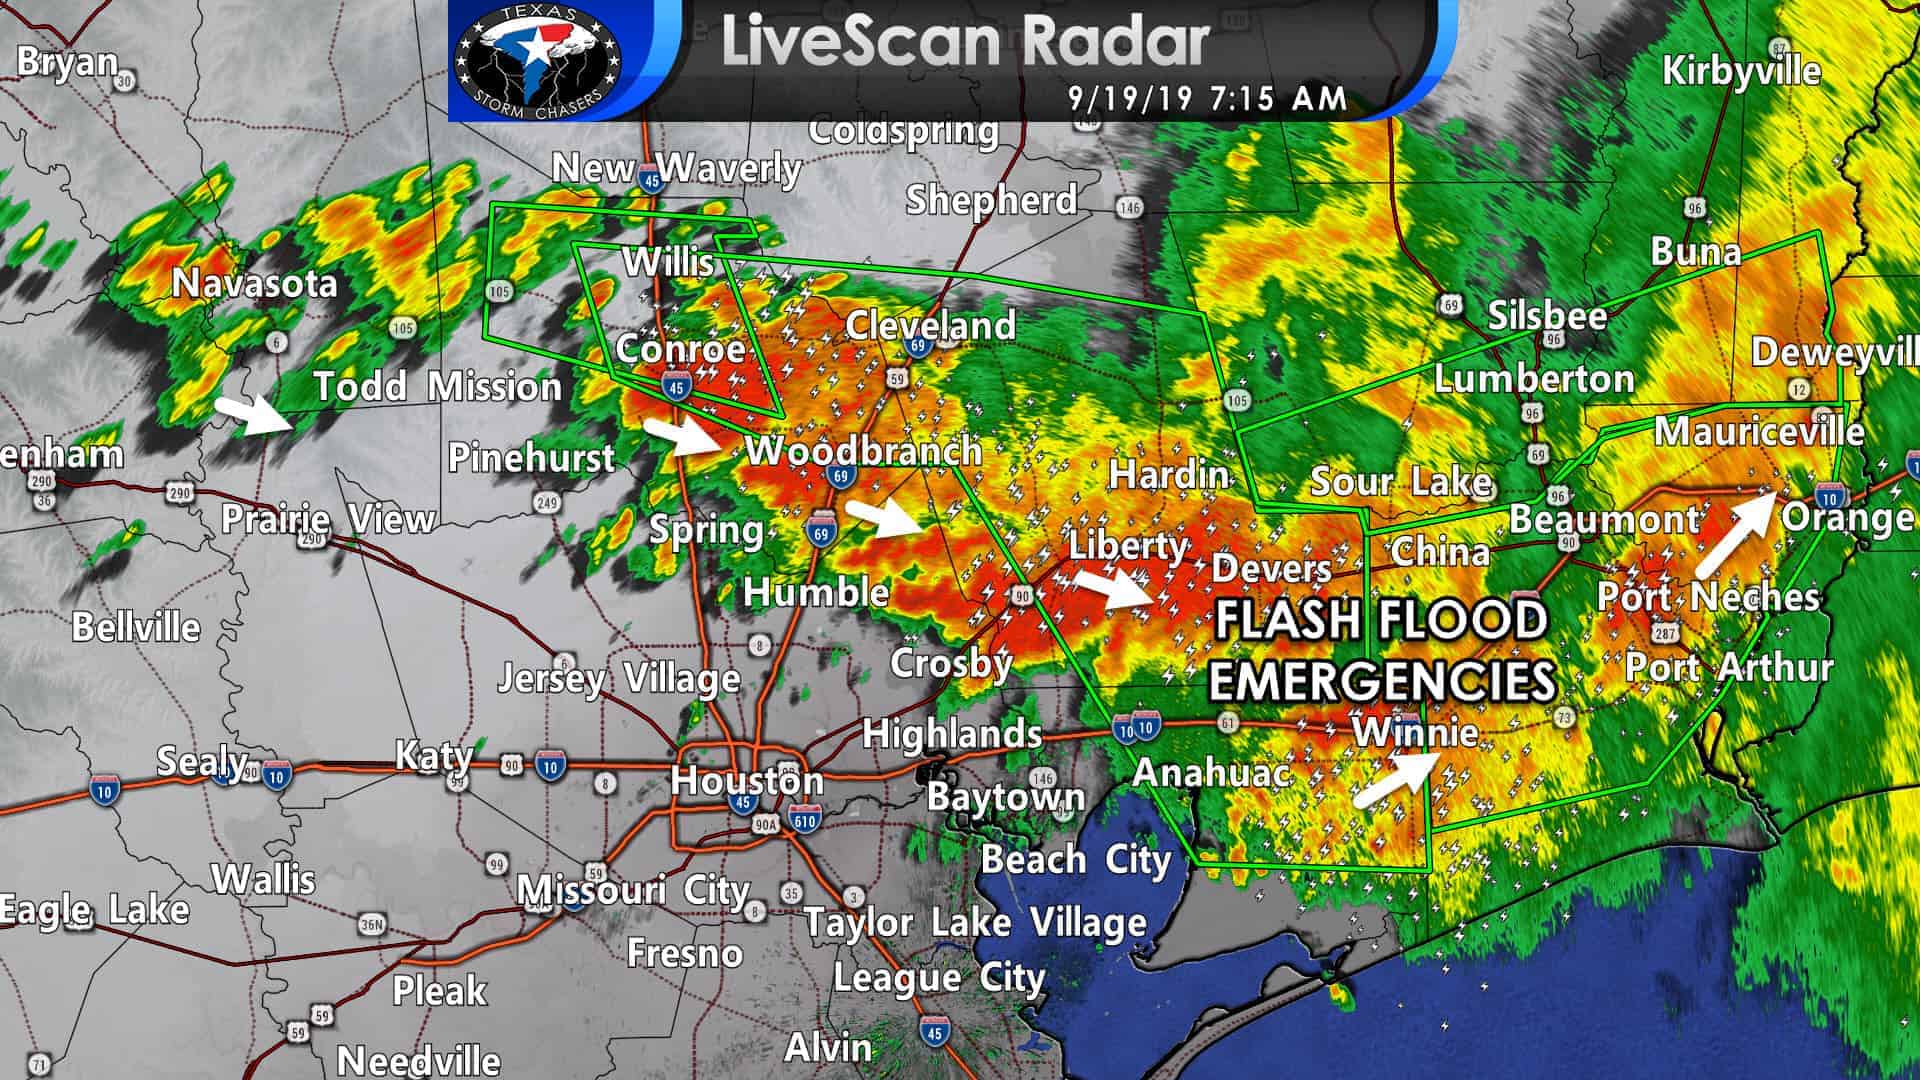 720 AM Update: Flash Flood Emergencies Extended from Conroe to Beaumont